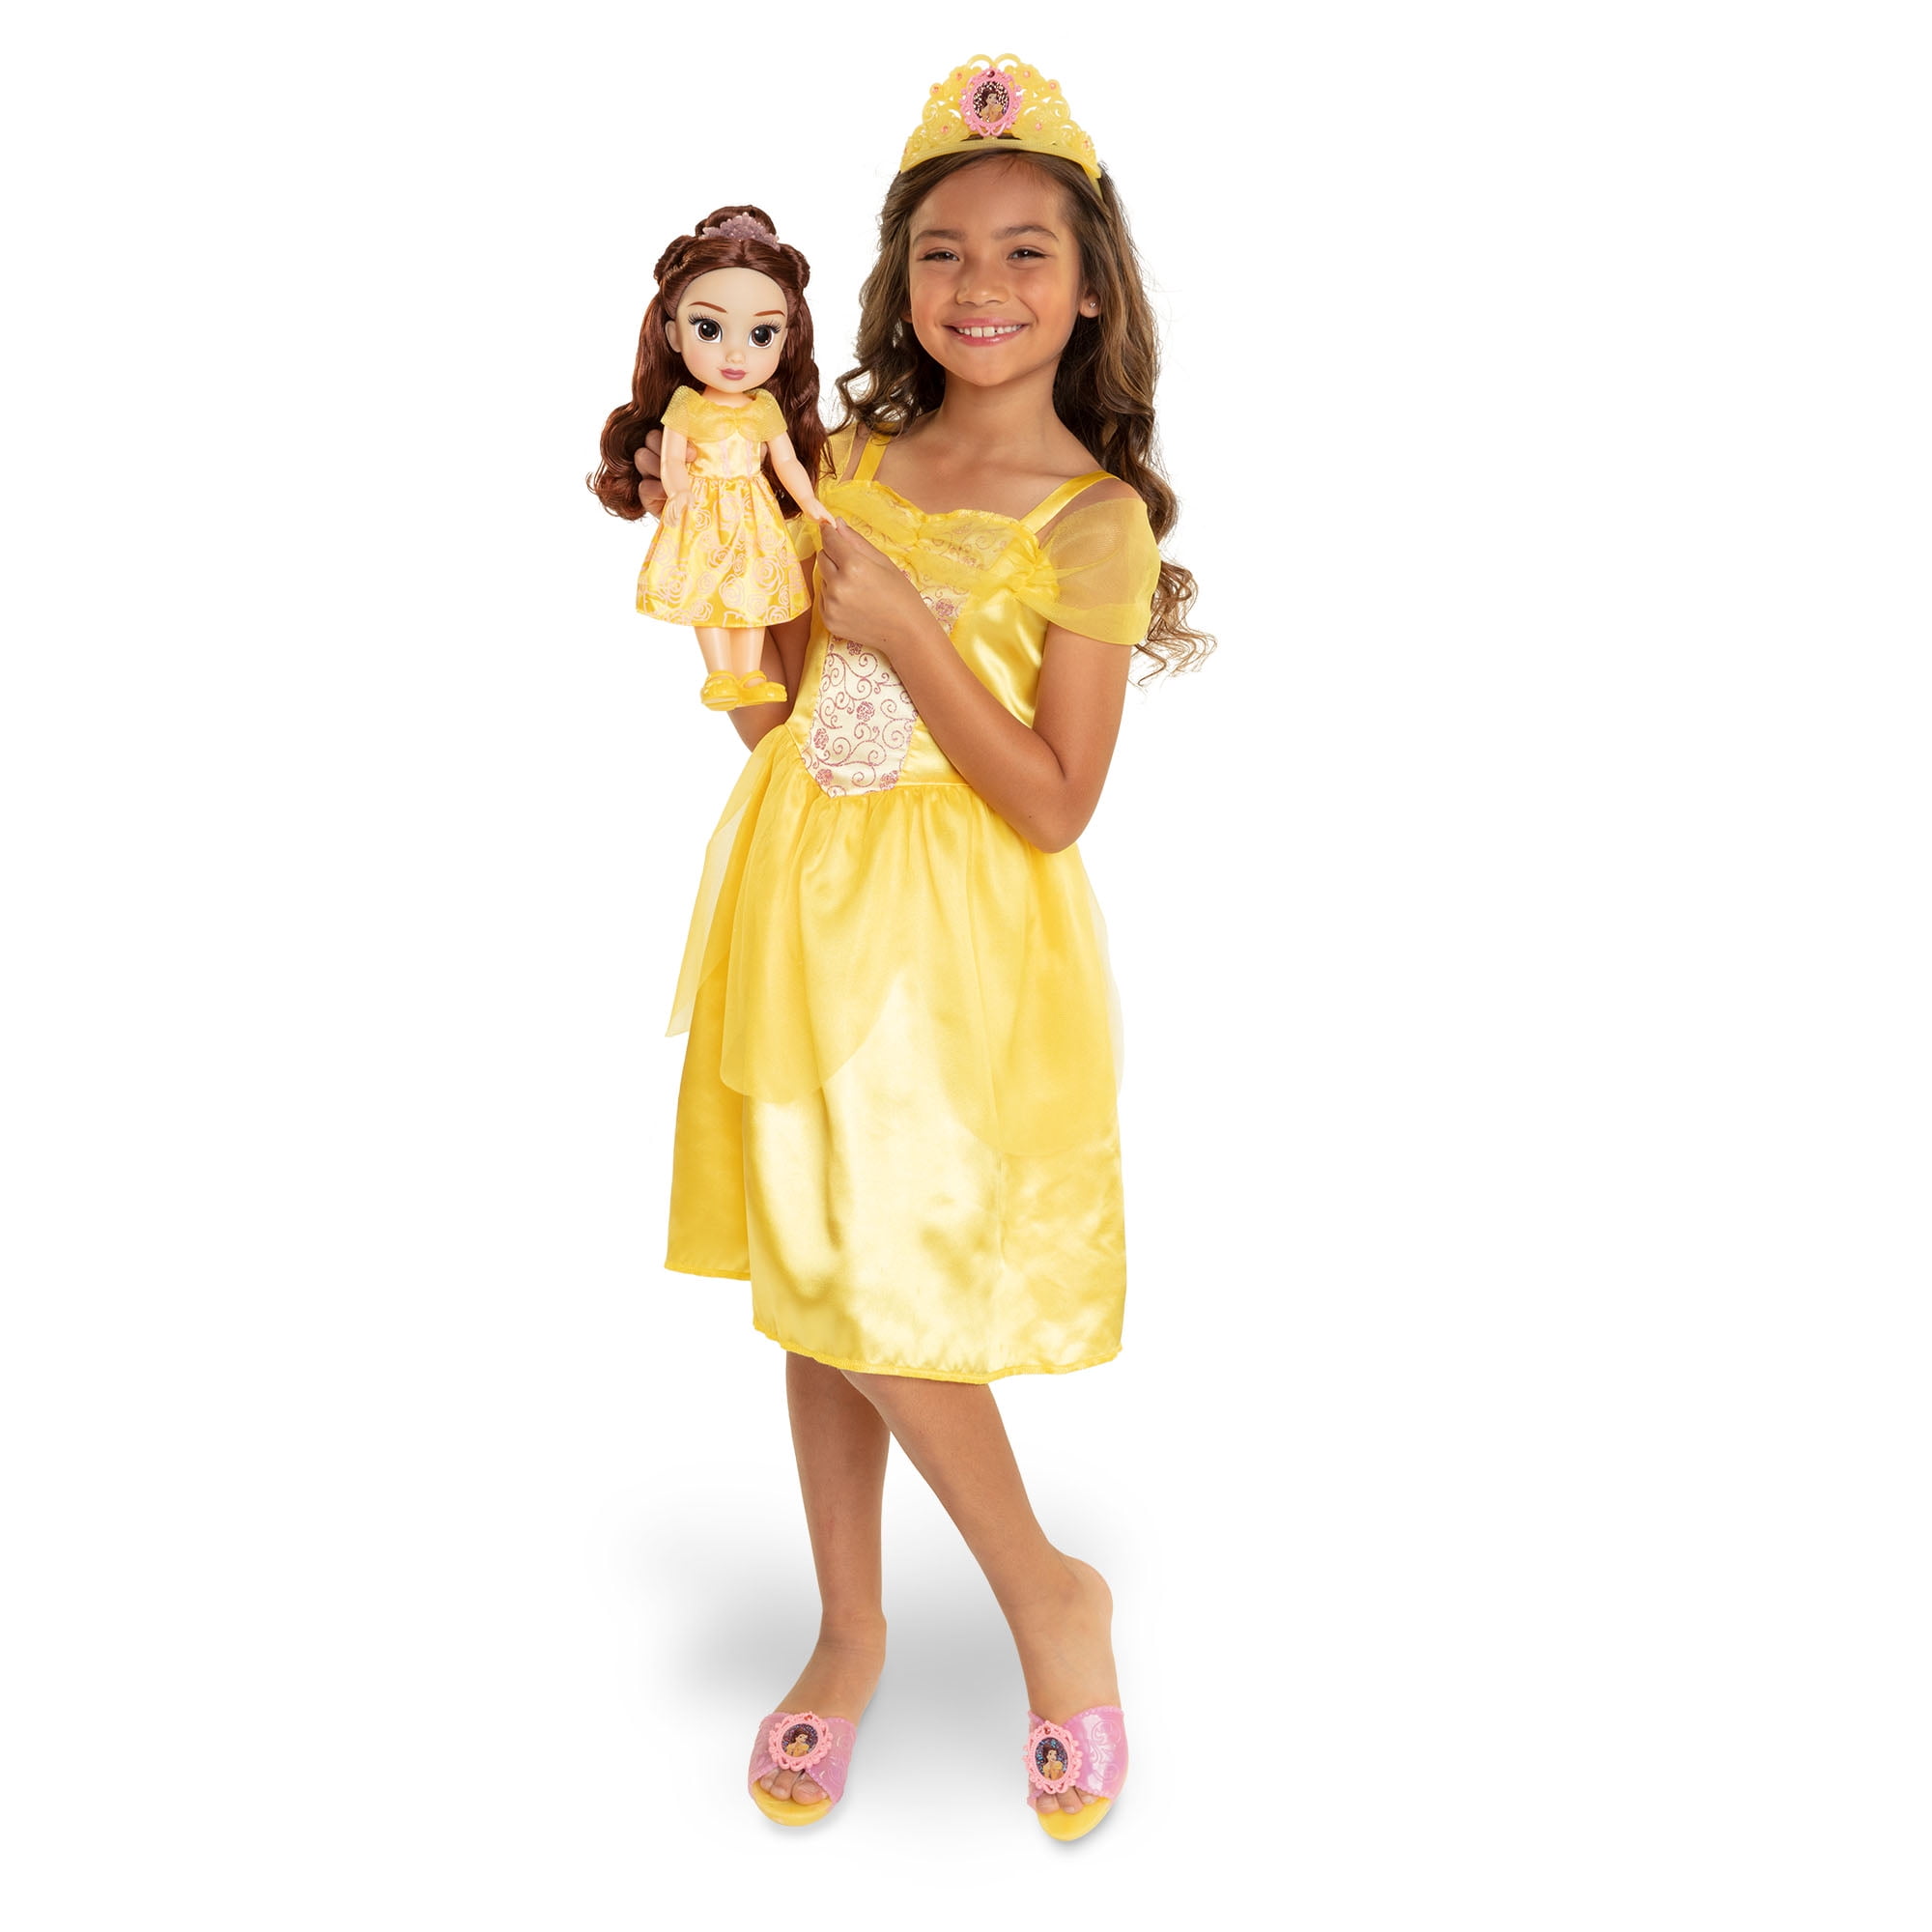 Disney Princess Belle Toddler Doll with Child Sized Dress and Accessories